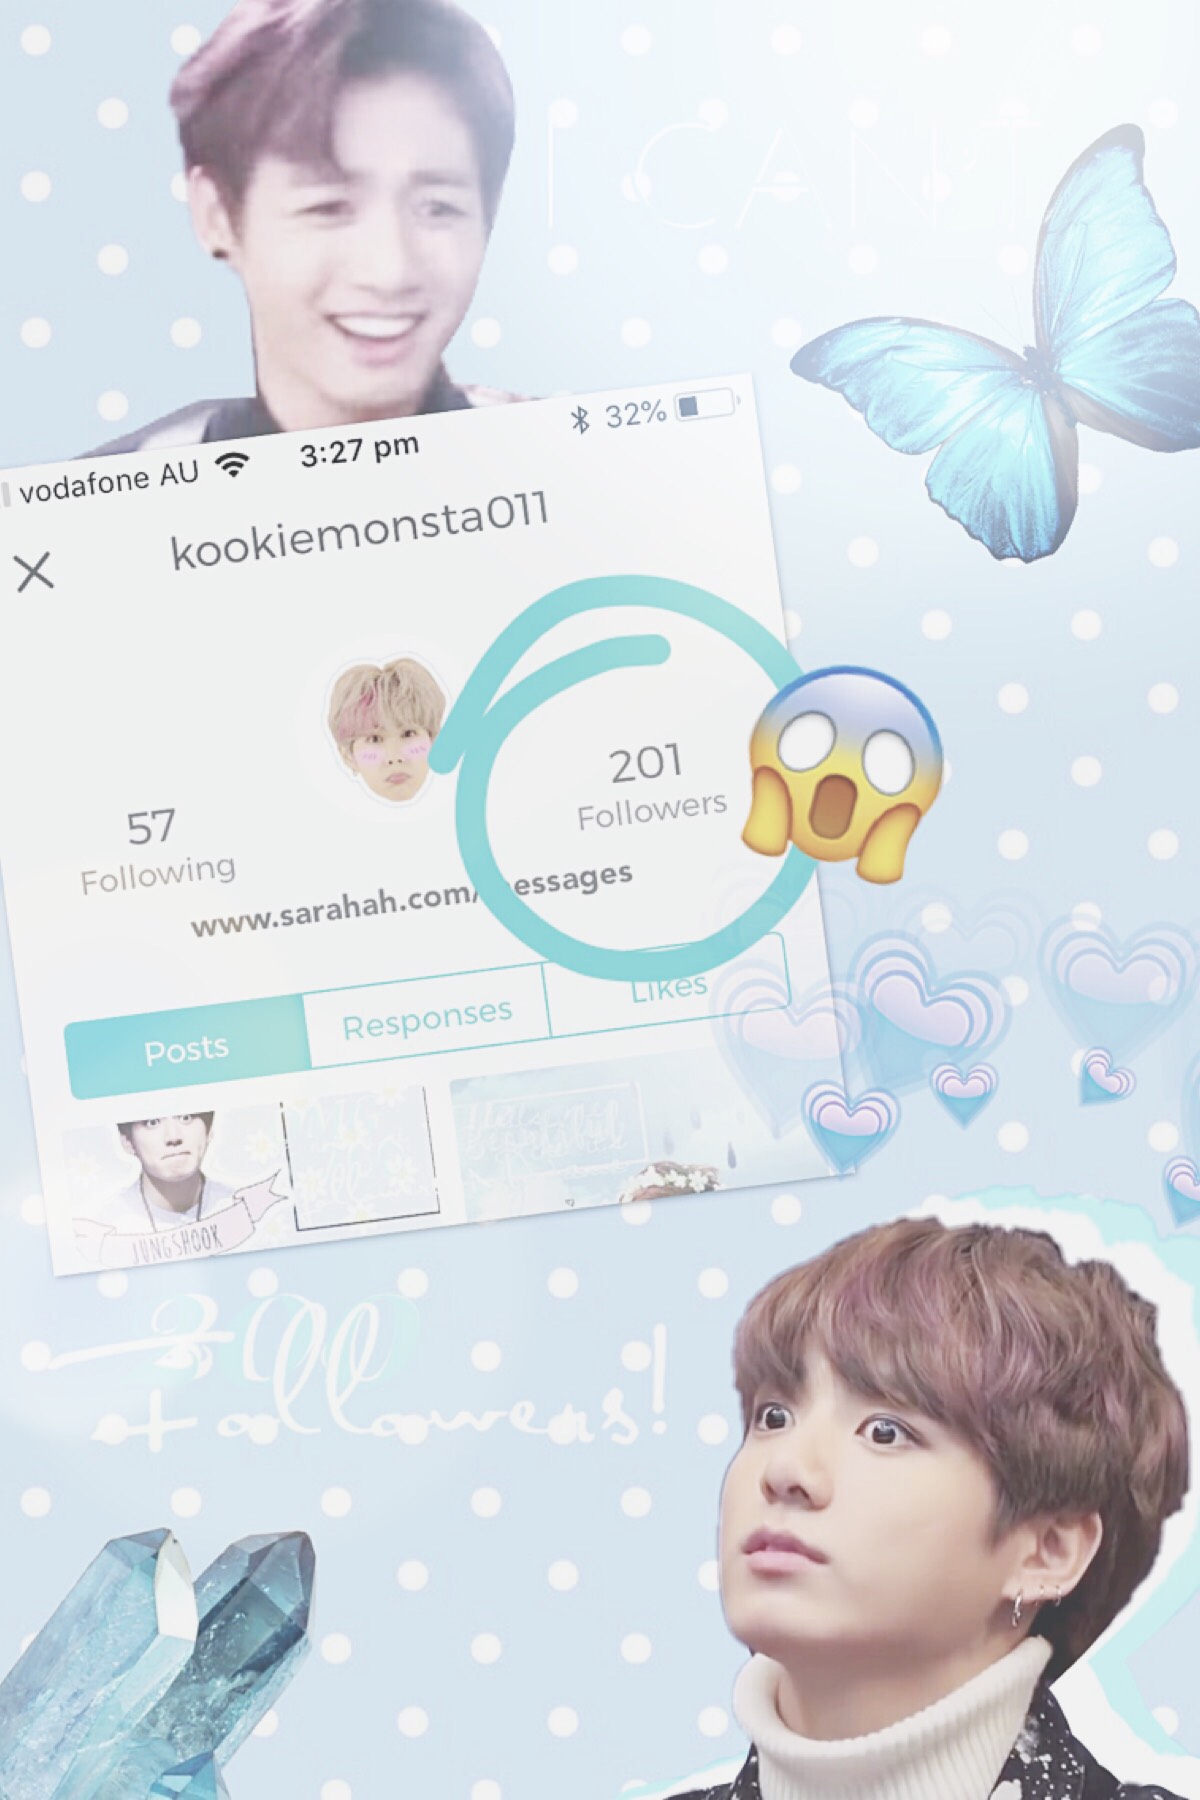 •kookiemonster011•
IM SO EXCITED!! Literally hours after I posted my last collages IVE ALREADY HIT 200!!!!!
❤️❤️❤️❤️
Special thanks to Wolfiee2006 for the shout outs. I hope that we can become better friends 😊